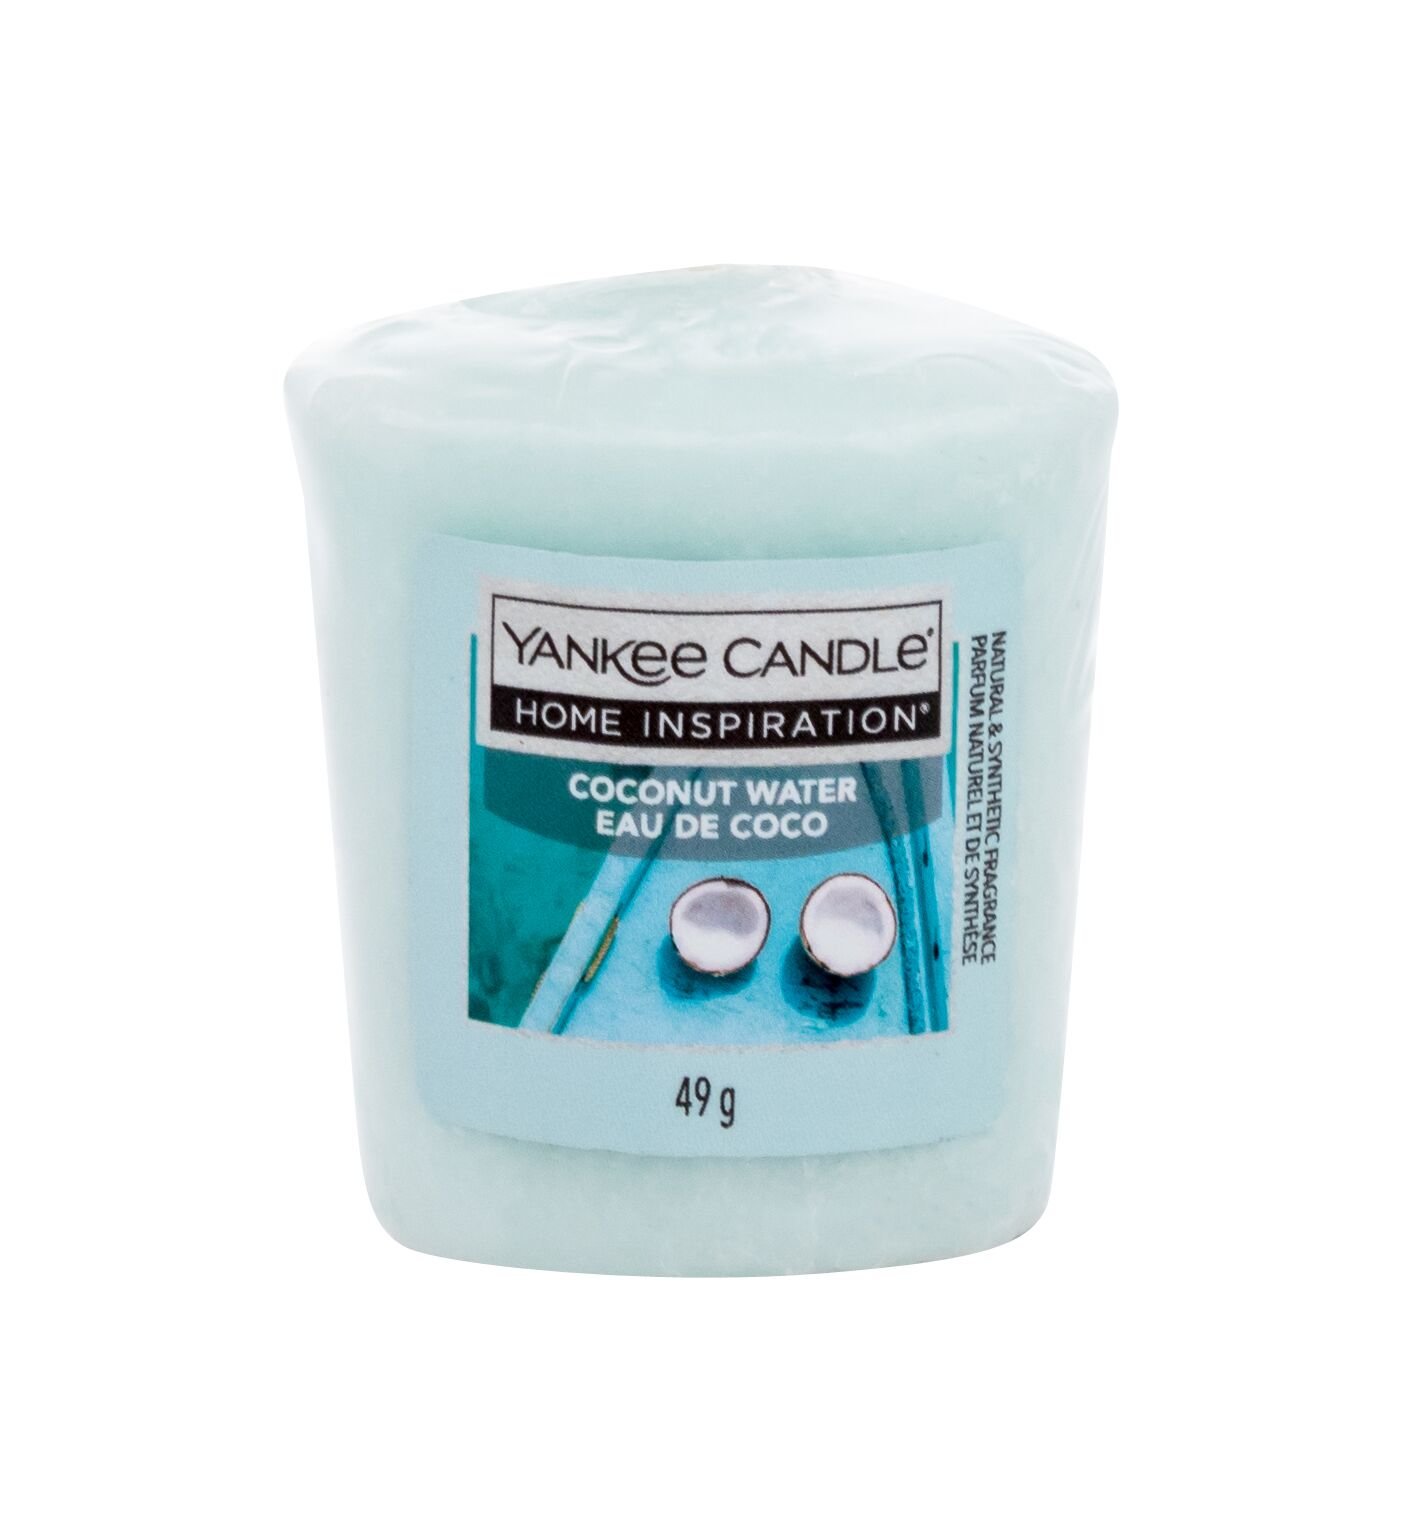 Yankee Candle Home Inspiration Coconut Water 49g Kvepalai Unisex Scented Candle